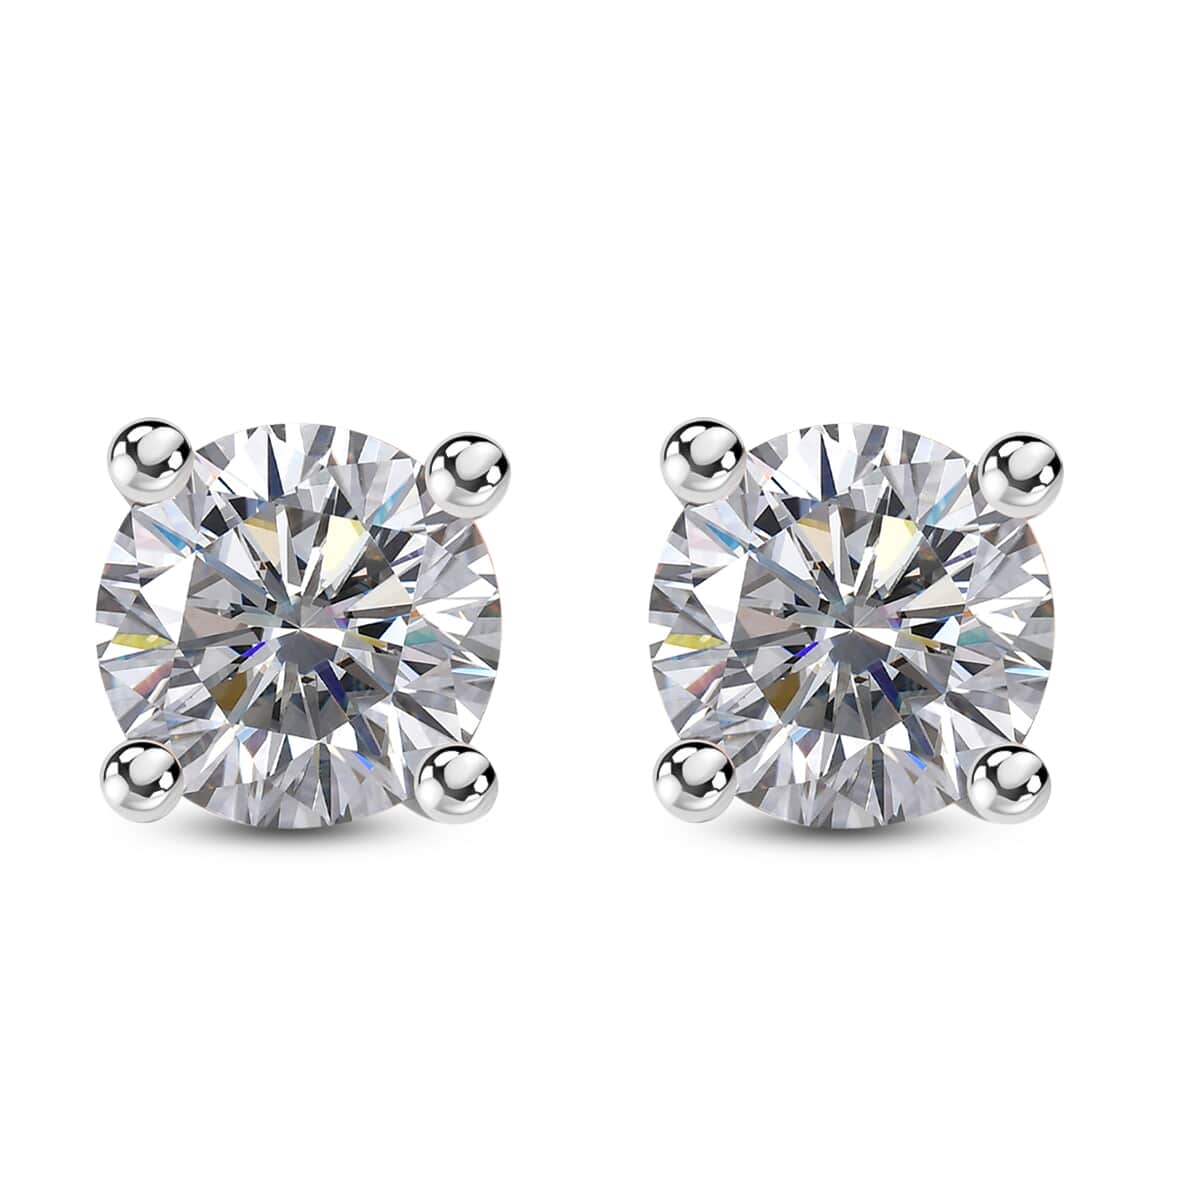 Emperor Cut Moissanite Solitaire Stud Earrings in Platinum Over Sterling Silver, Stud Earrings, Moissanite Studs, Anniversary Gifts For Her 1.60 ctw image number 0